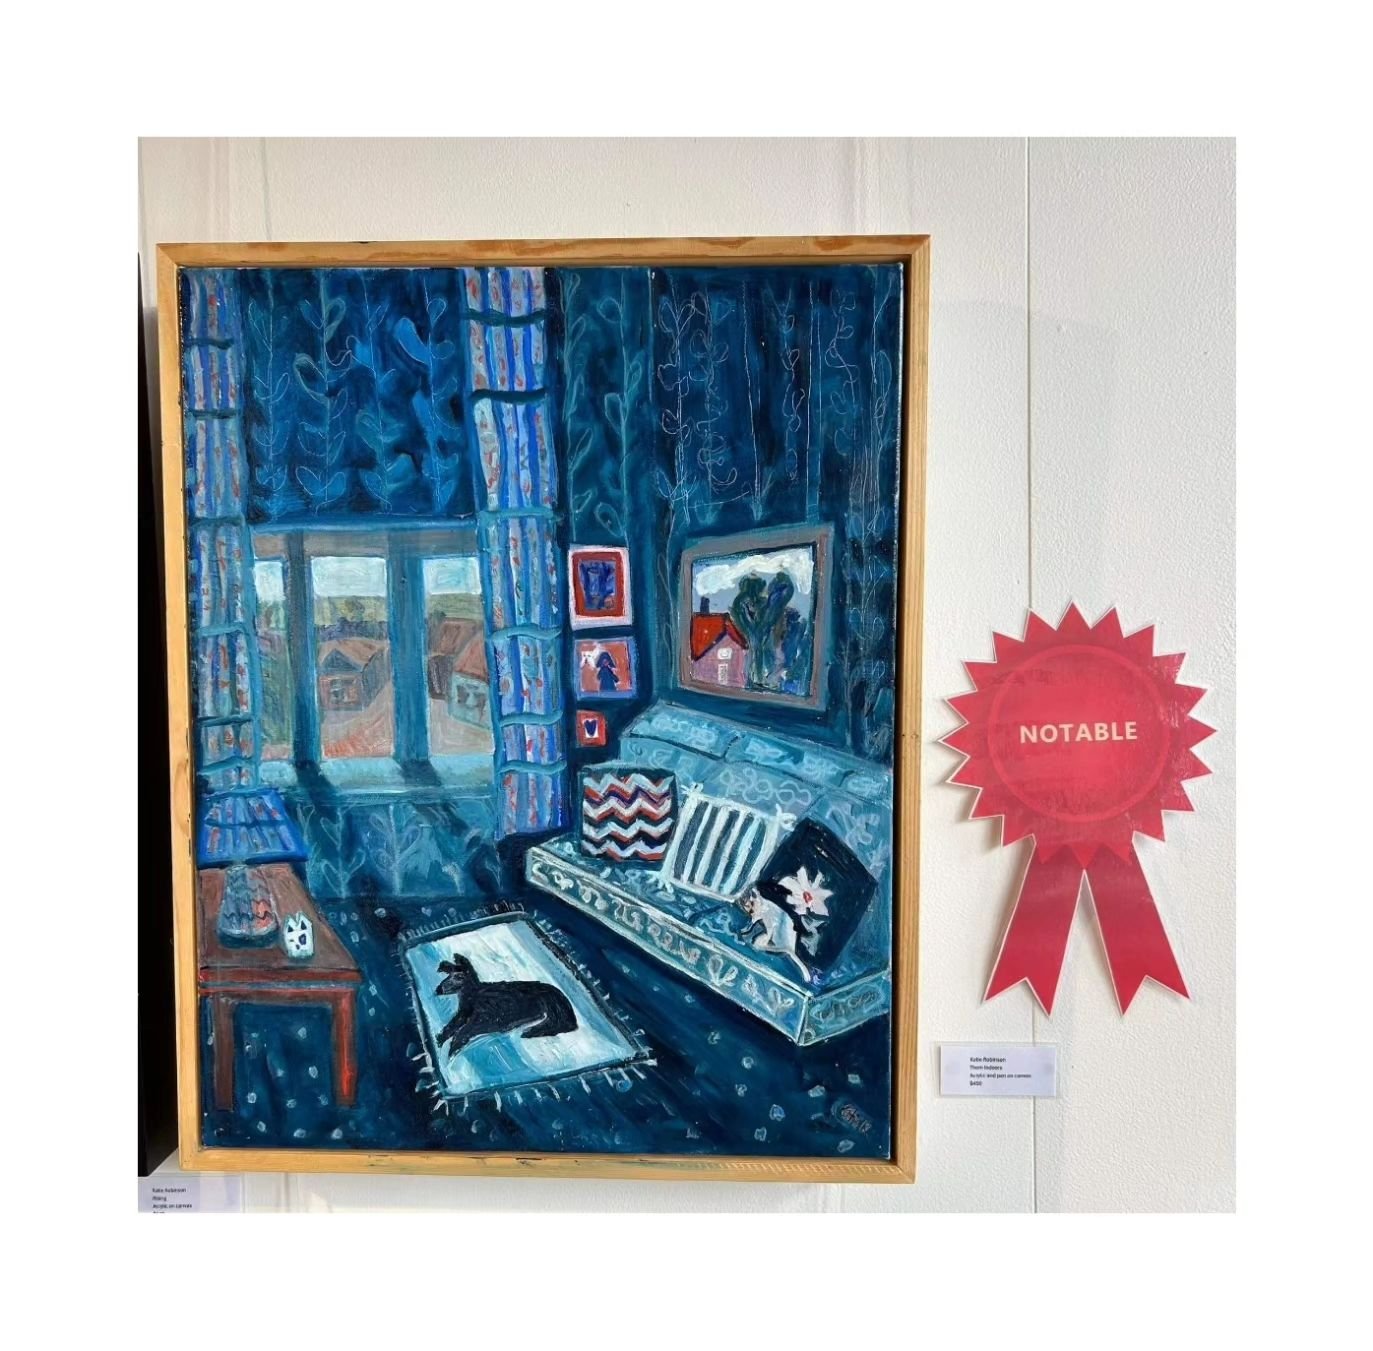 Delighted that I received a &quot;Notable Artist&quot; award for Them Indoors in the @lakehousearts Members Merit Awards show. 

Thanks again to @joelpotter_photography who pushed me on this painting .. and wouldn't let me stop until he was satisfied